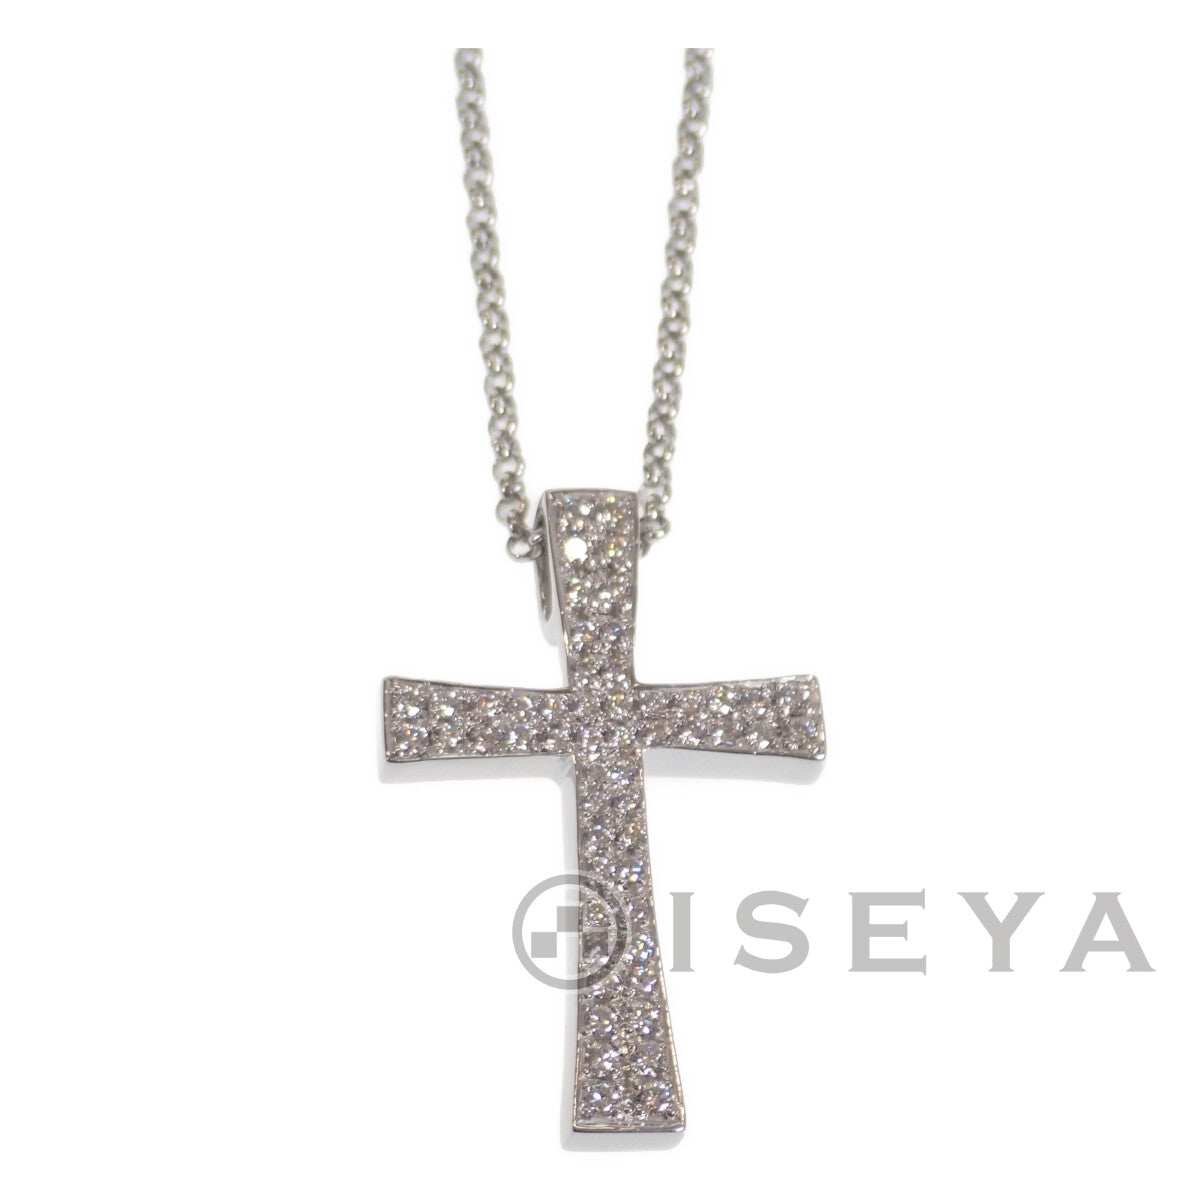 [LuxUness]  Unique Cross Design D0.667ct Necklace in K18 White Gold with Diamonds for Women in Excellent condition